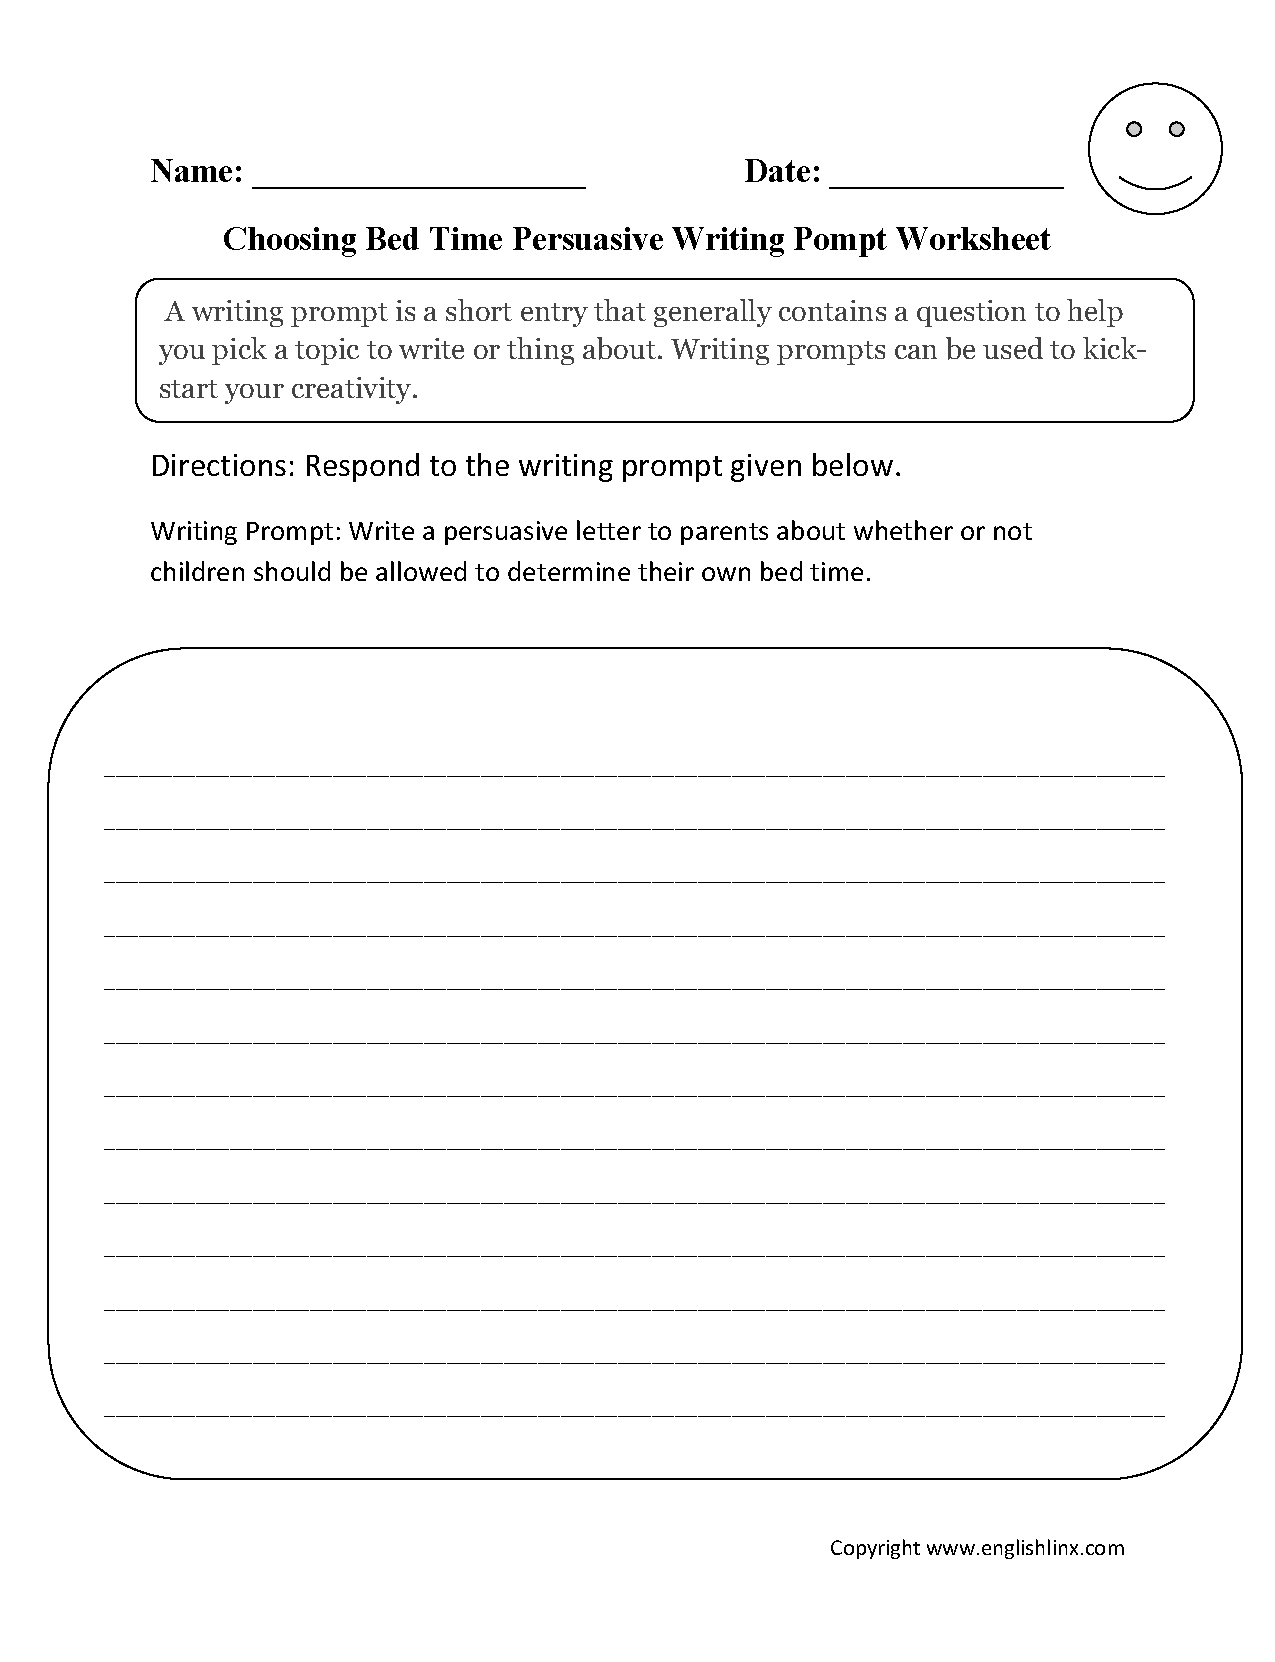 Bed Time Persuasive Writing Prompt Worksheet